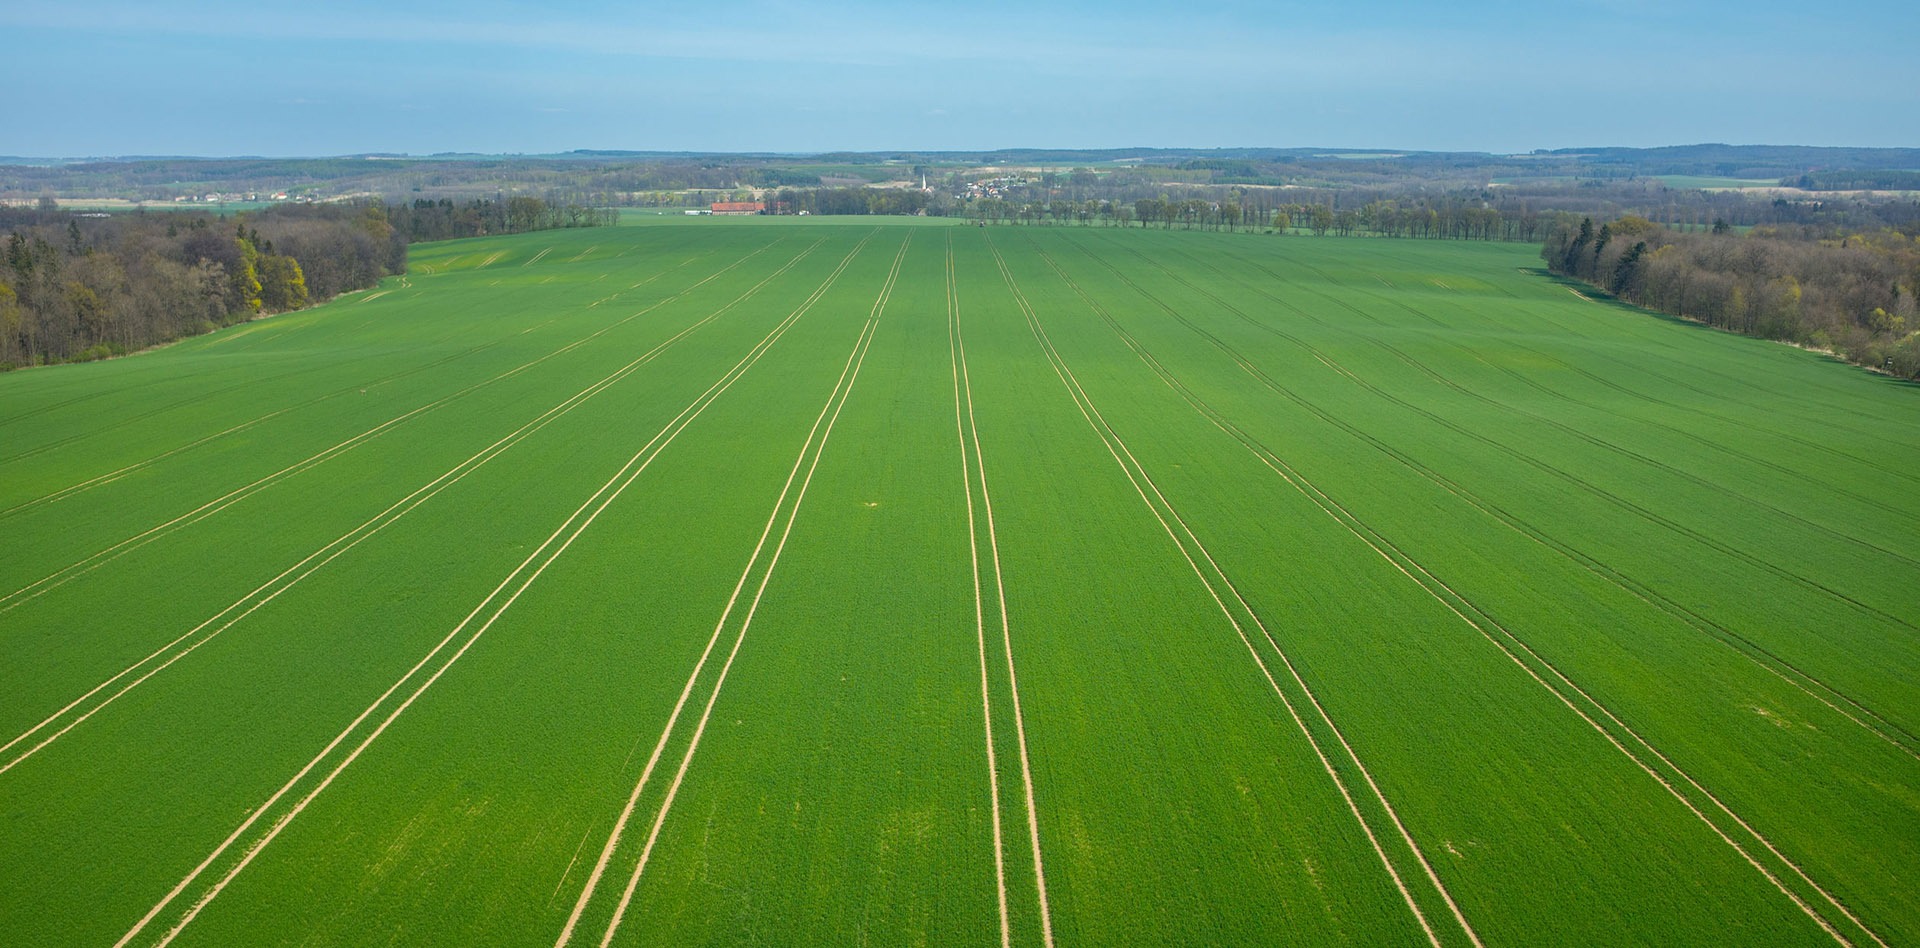 The Turfgrass Group aerial view of grower's field